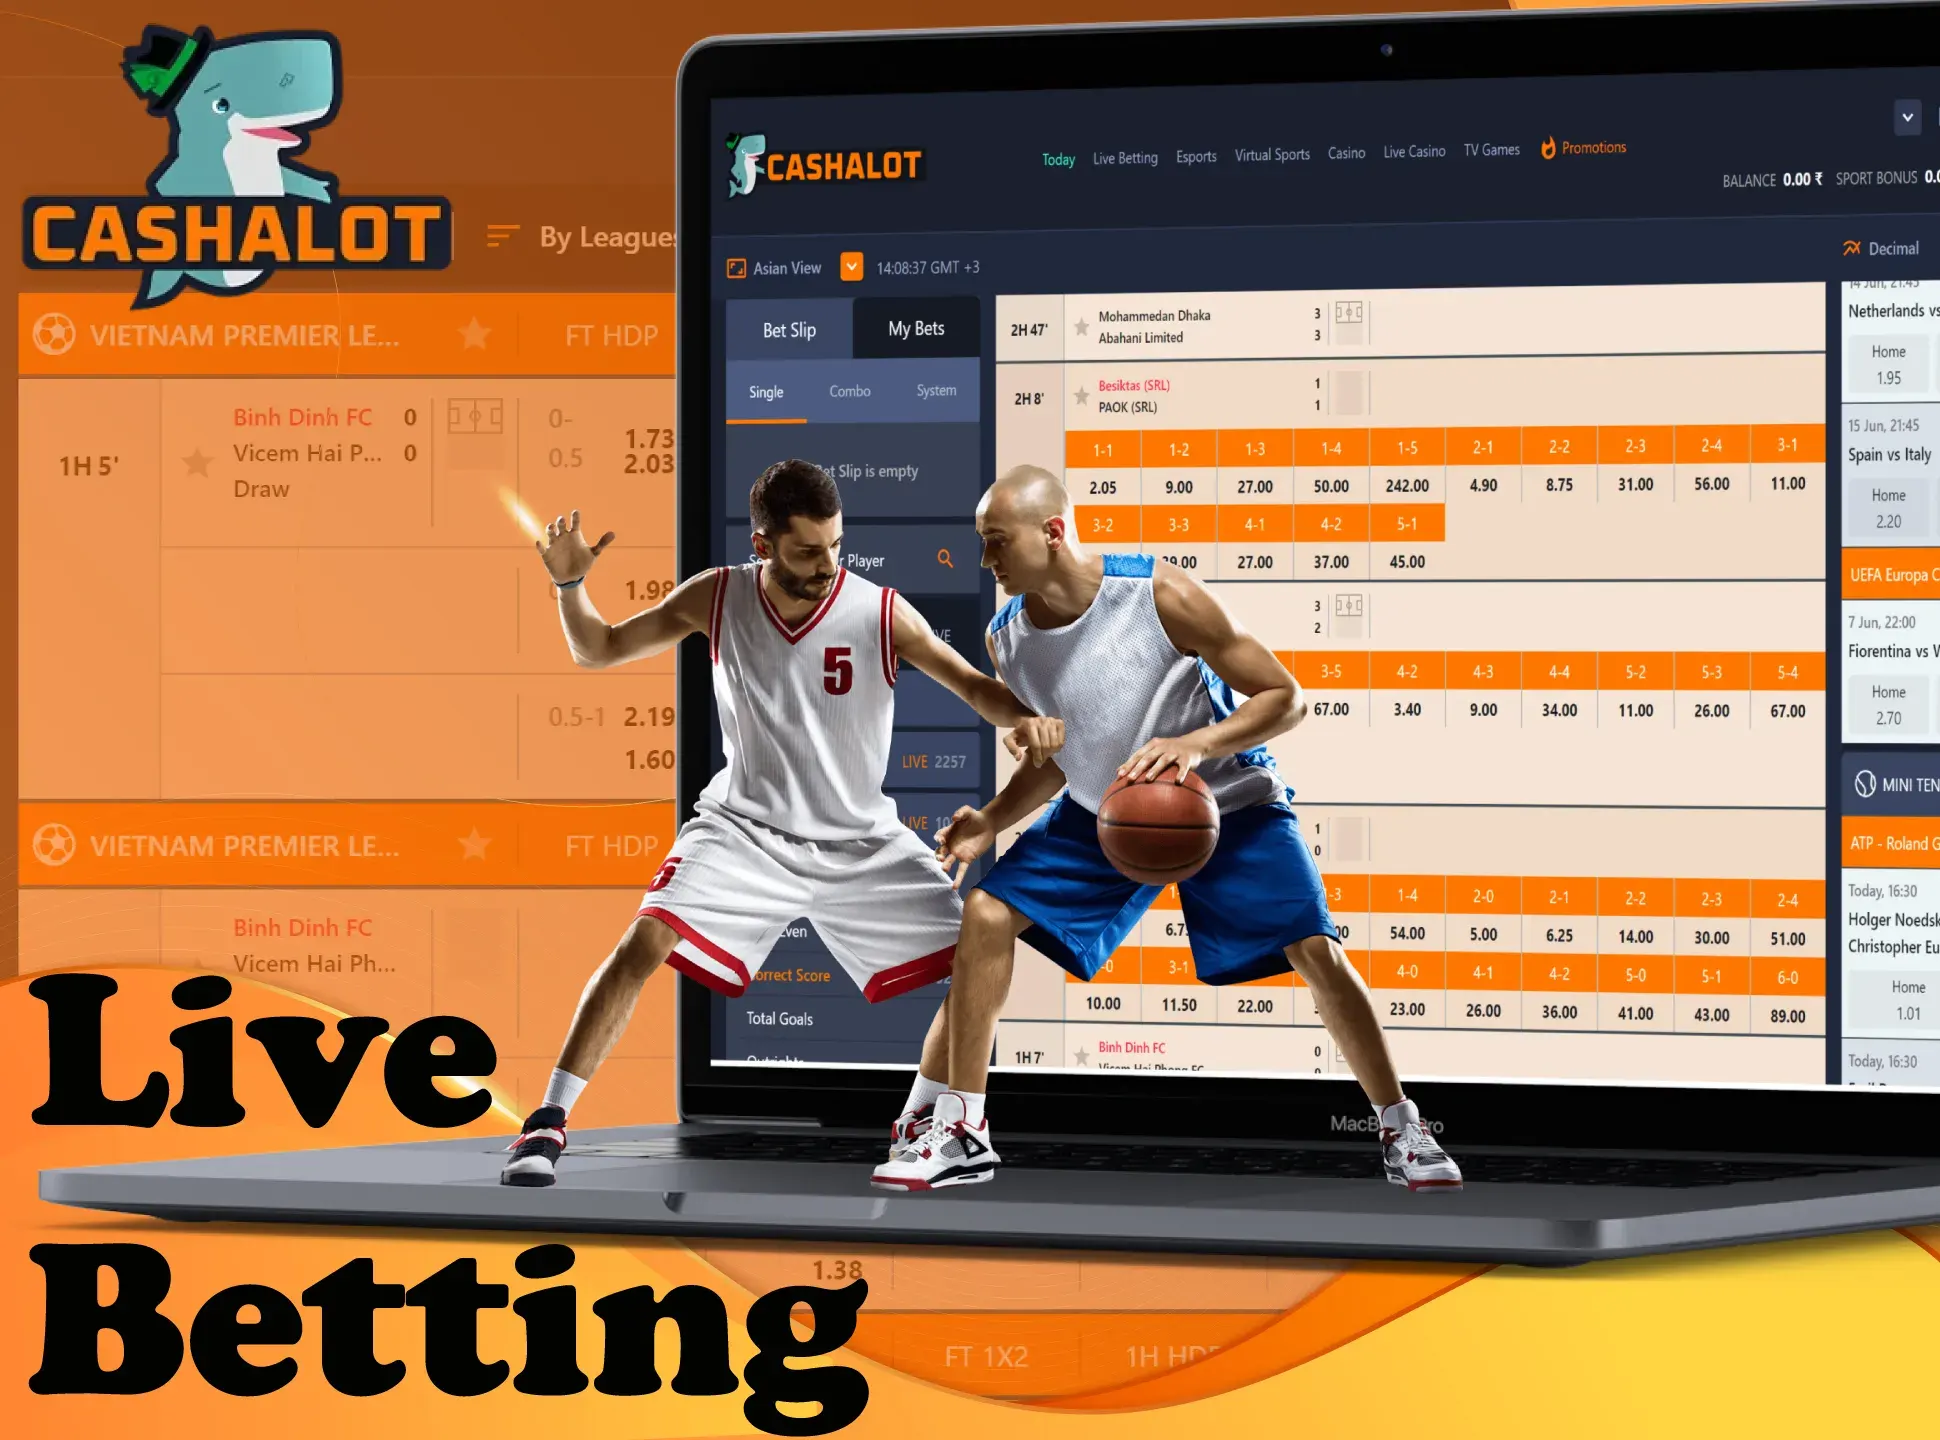 Make bets in a live format at Cashalot.